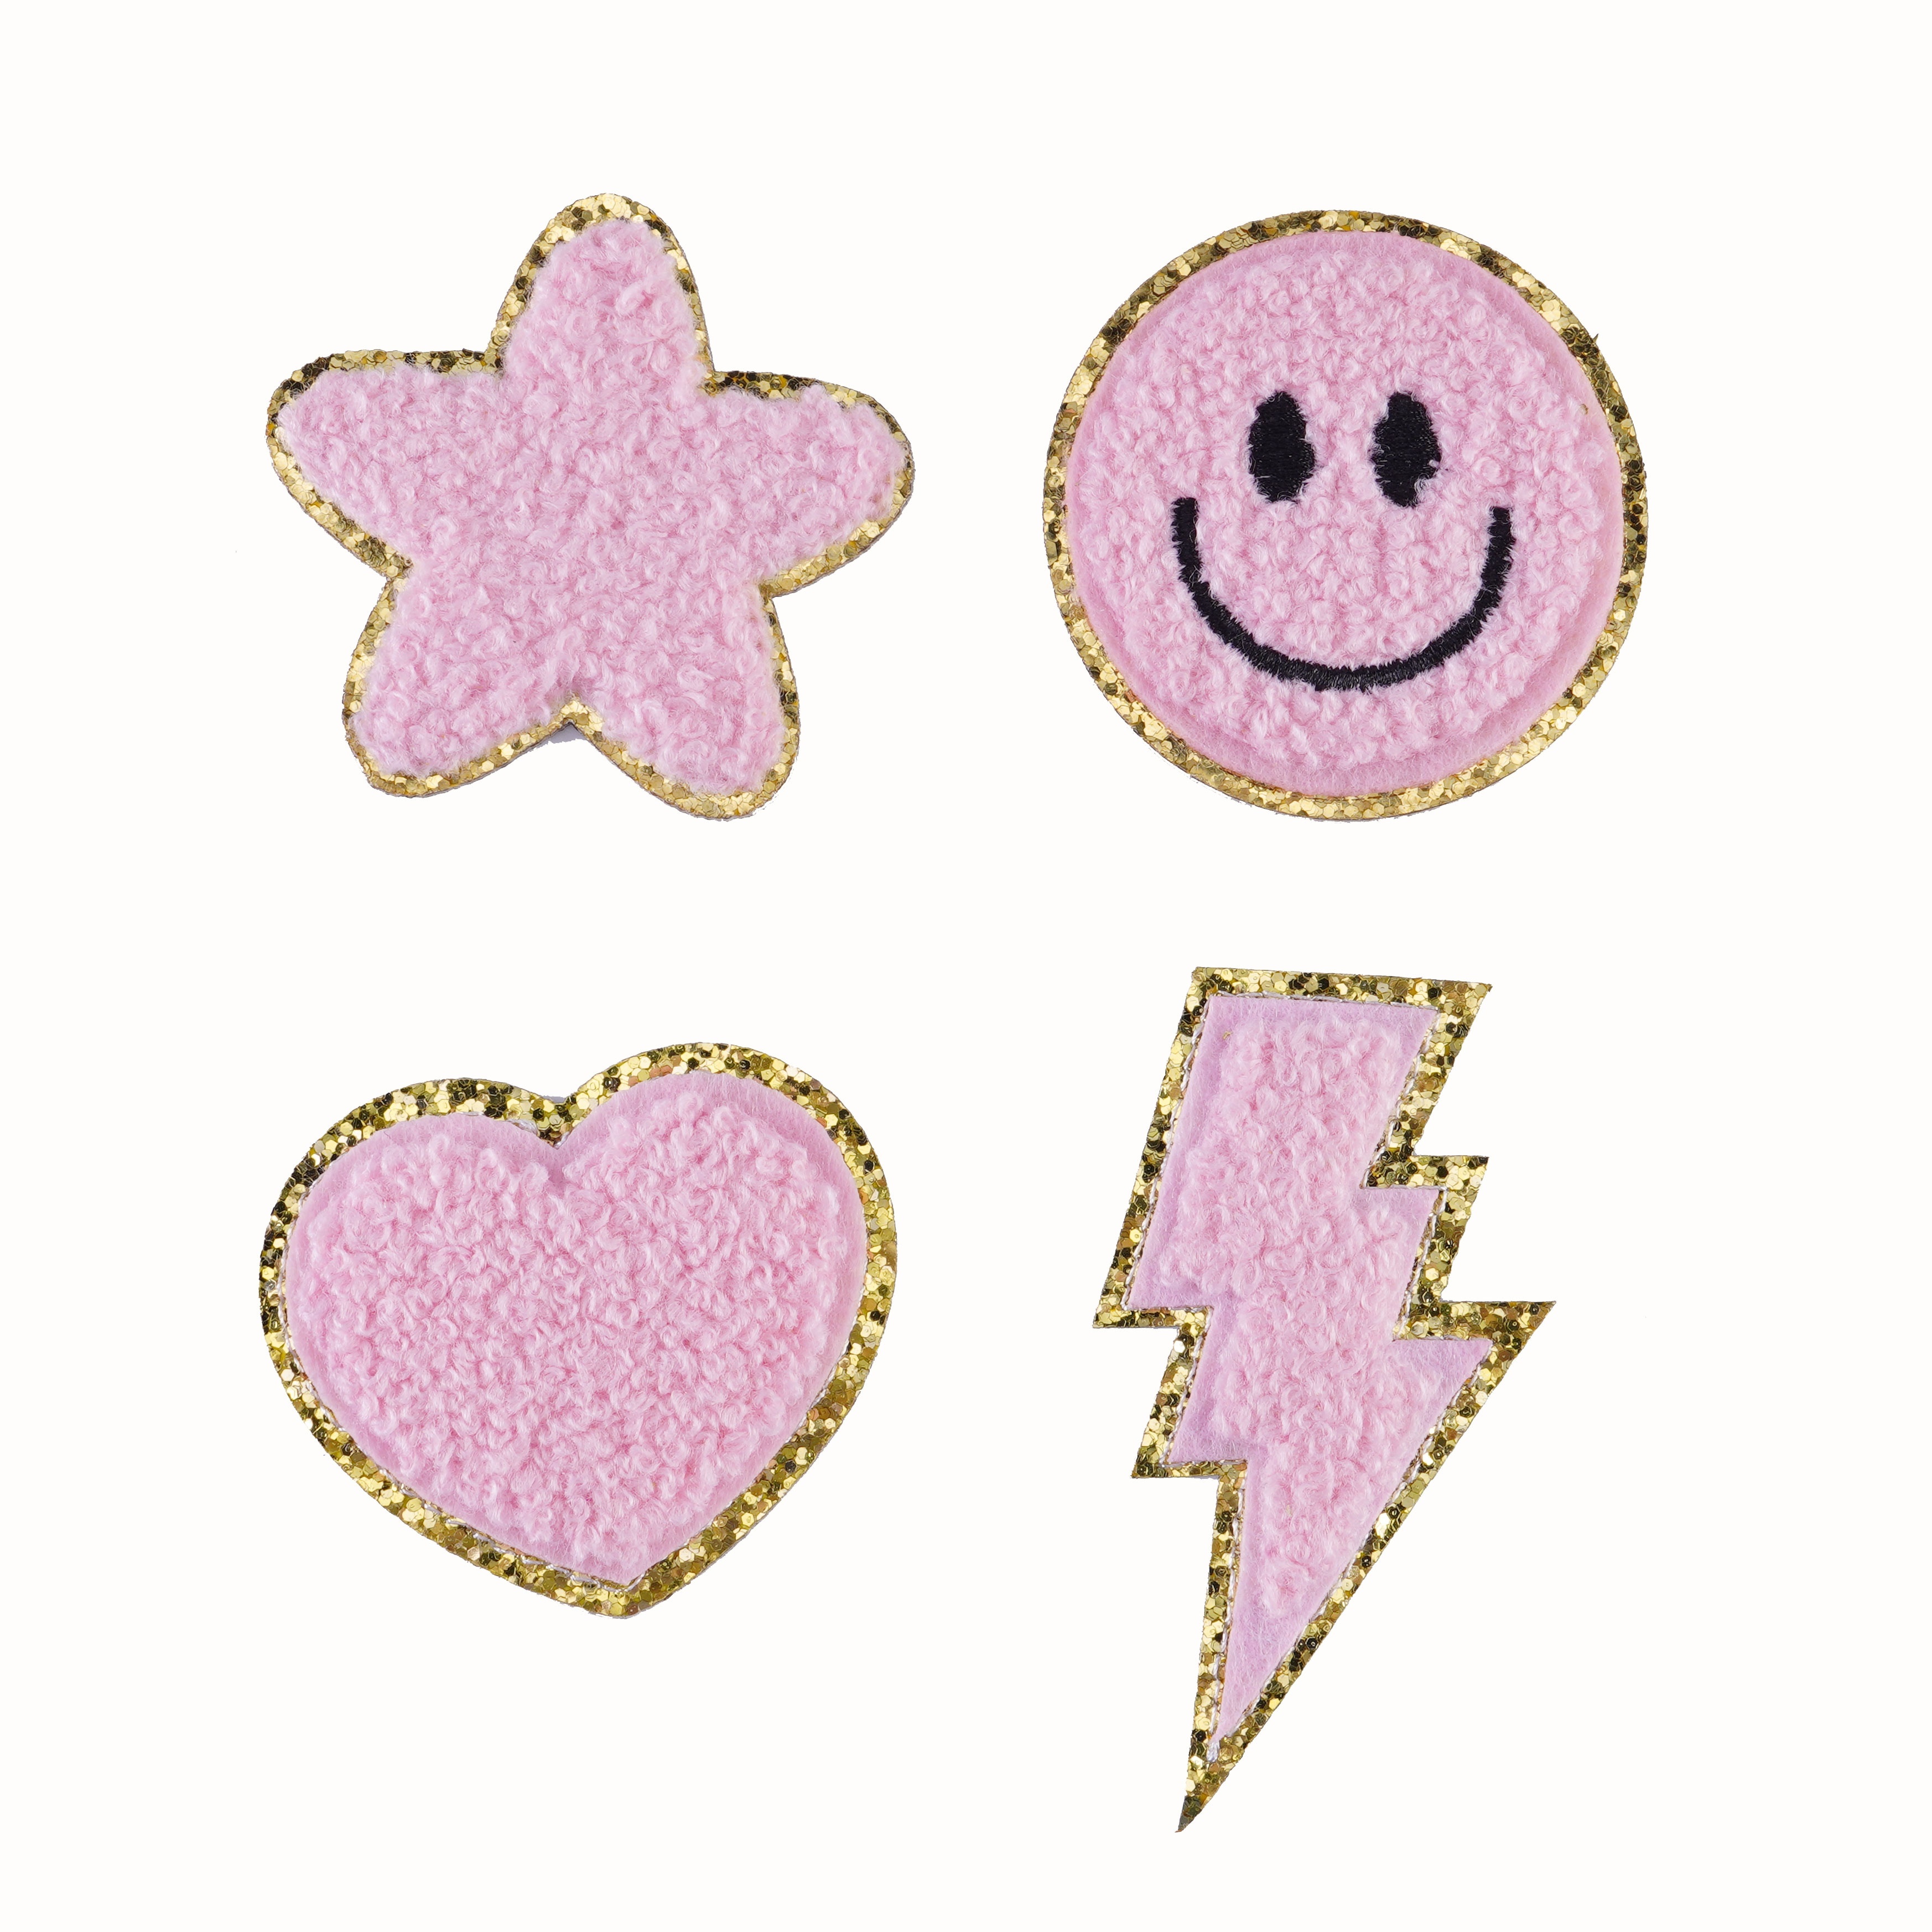 Cute Chenille Embroidered Patches Clouds Lightning Airplane Love